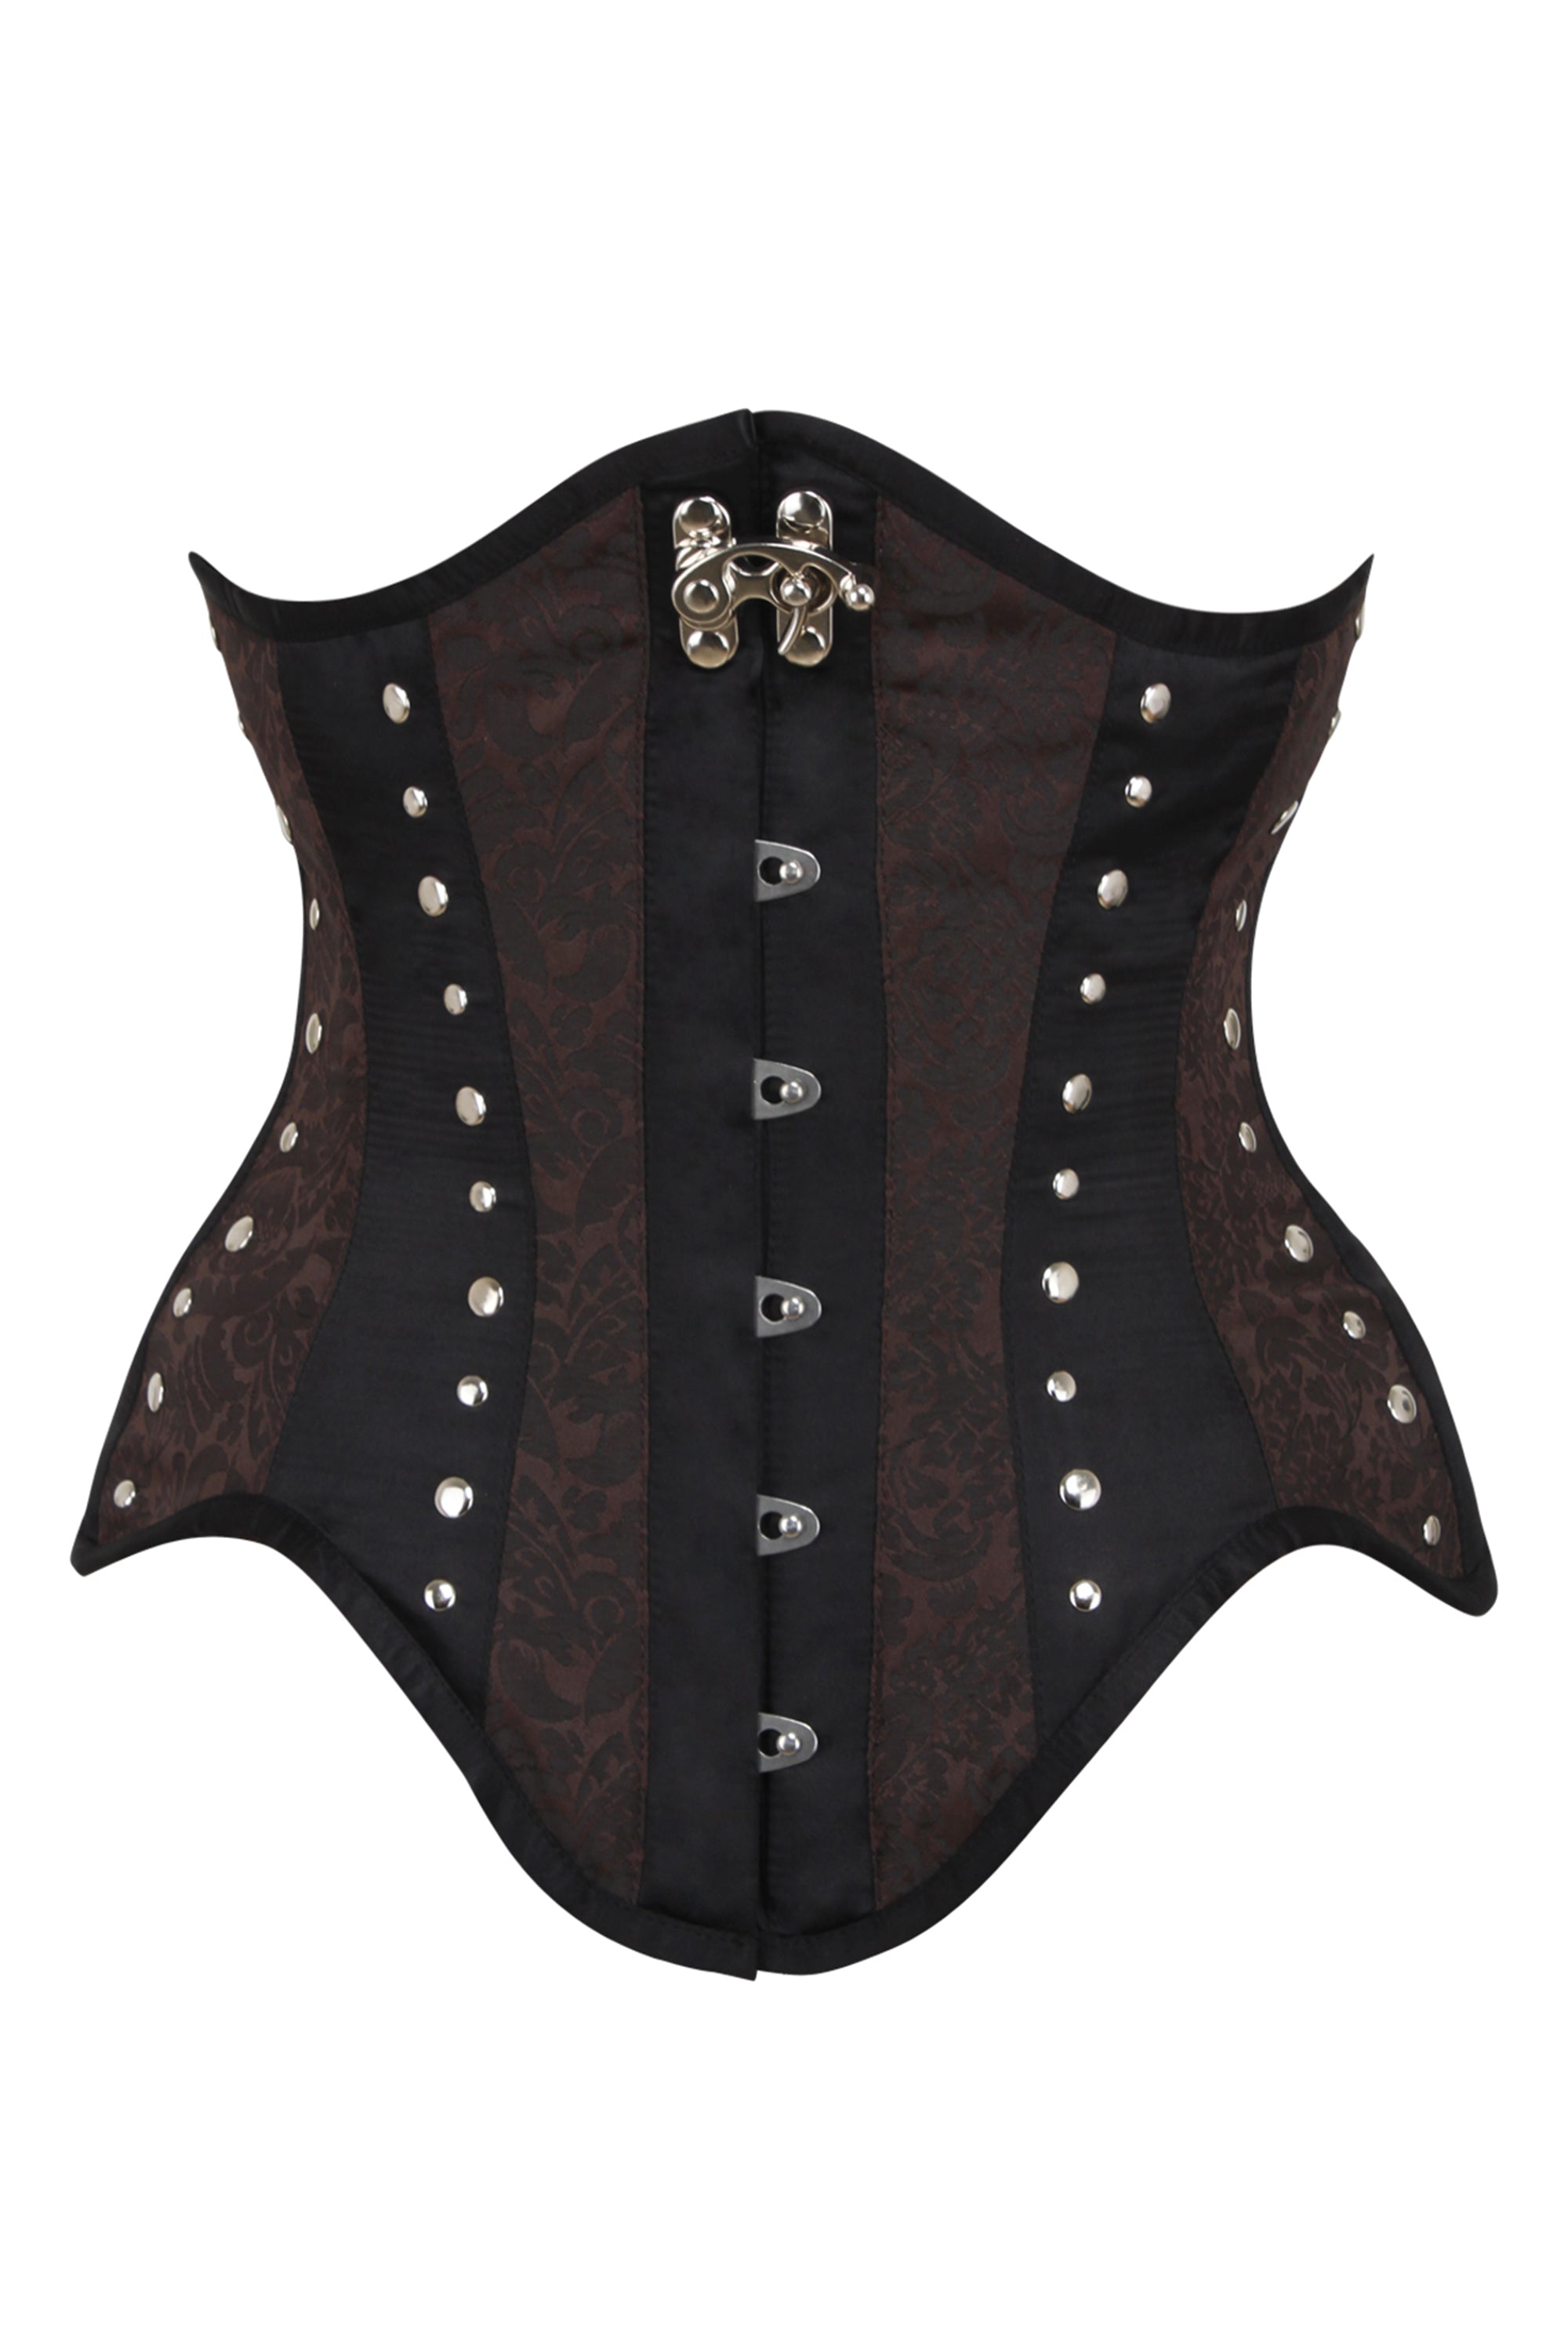 Black Pin Stripe Underbust Steampunk corset from The Altered City